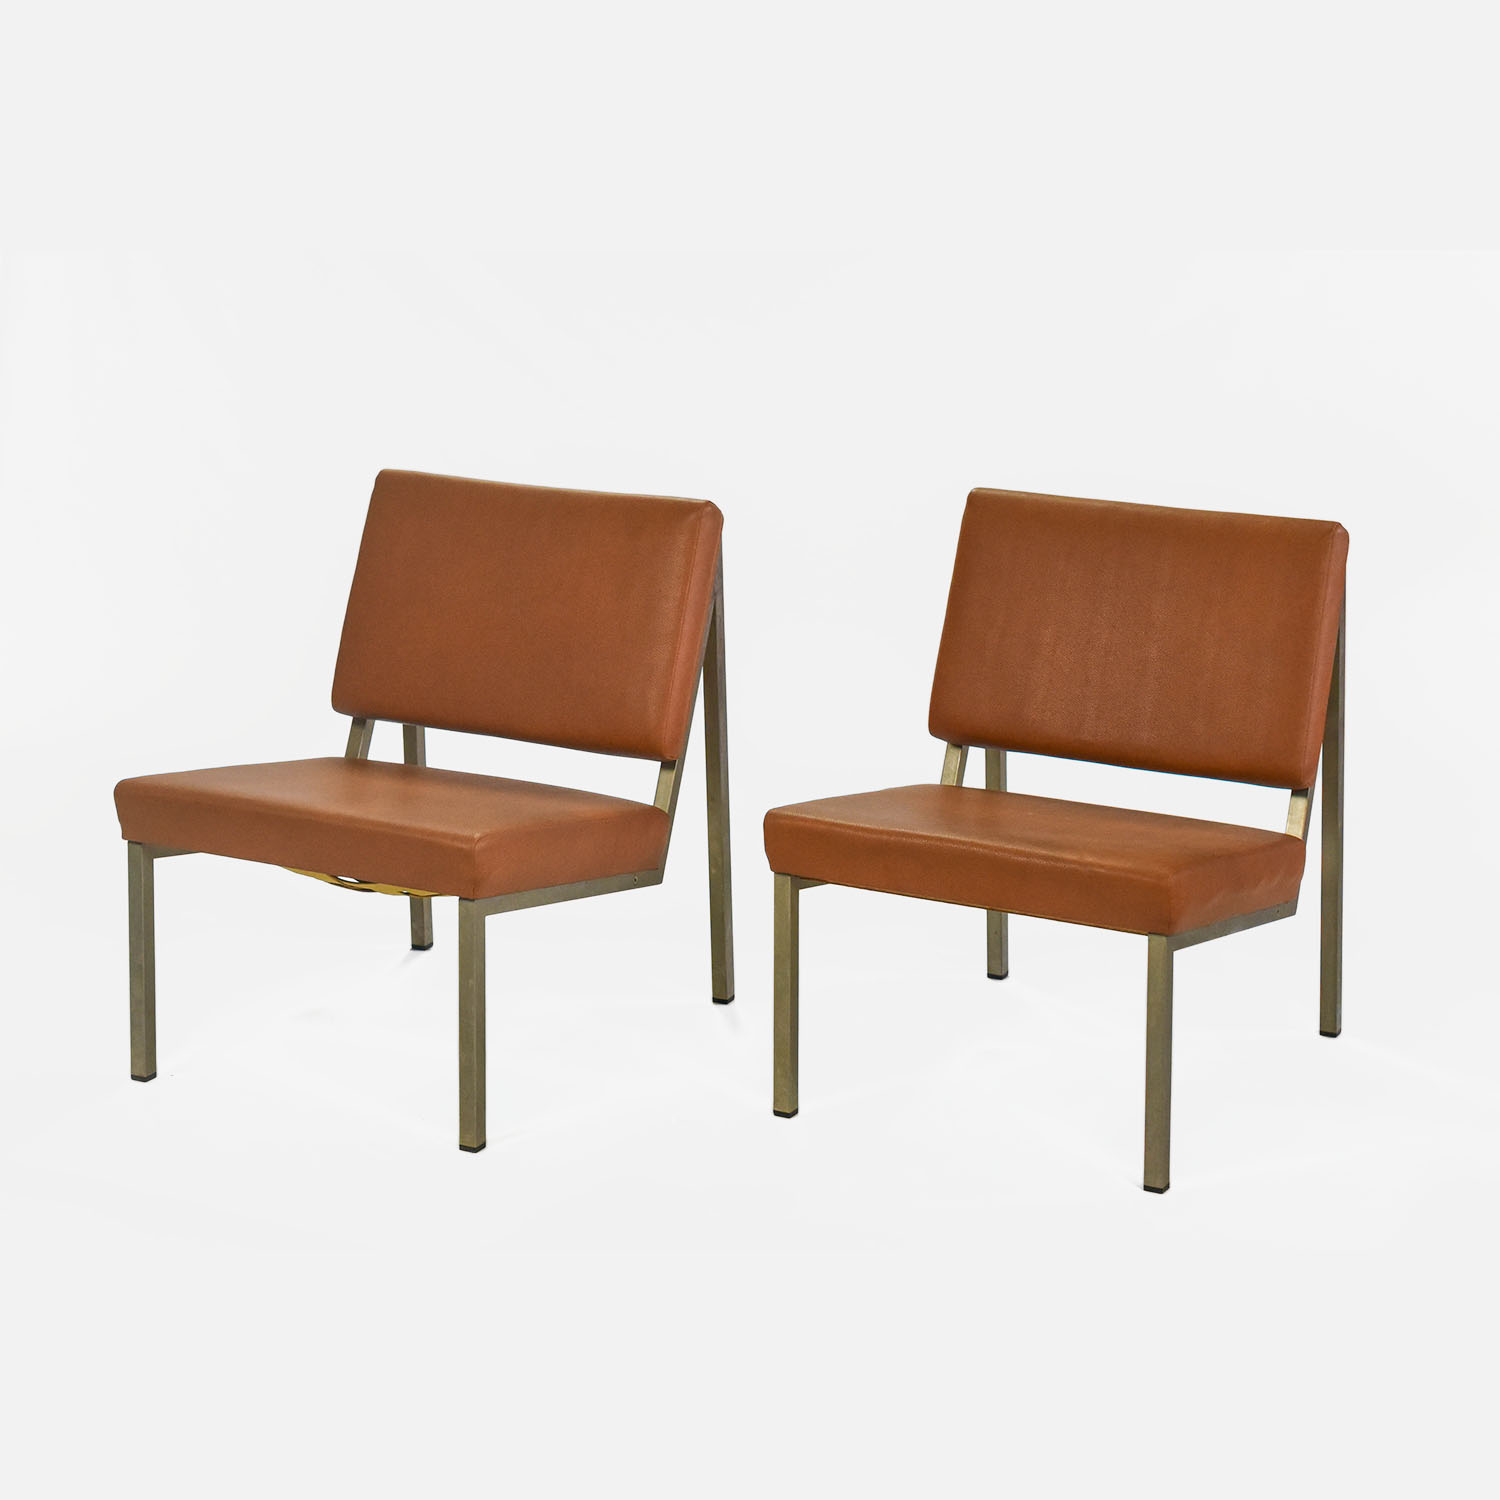 Two 1970s Modernist Square Tube Floating Seat Lounge Chairs